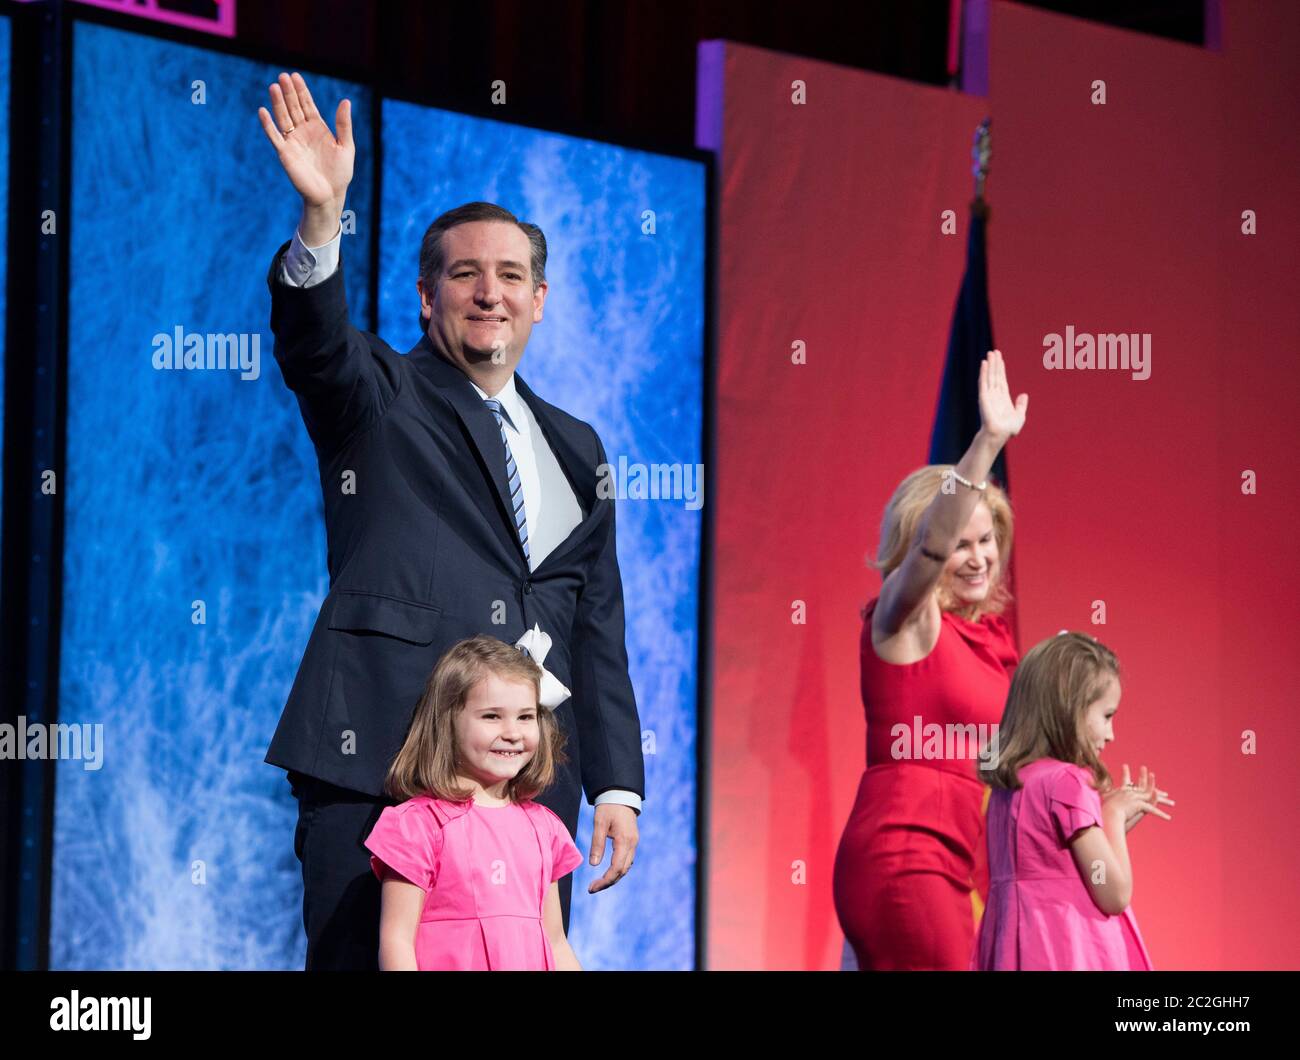 Dallas Texas USA, May 14 2016: U.S. Senator Ted Cruz of Texas waves to an adoring crowd as his wife and young daughters join him onstage at the Republican Party of Texas Convention. ©Bob Daemmrich Stock Photo